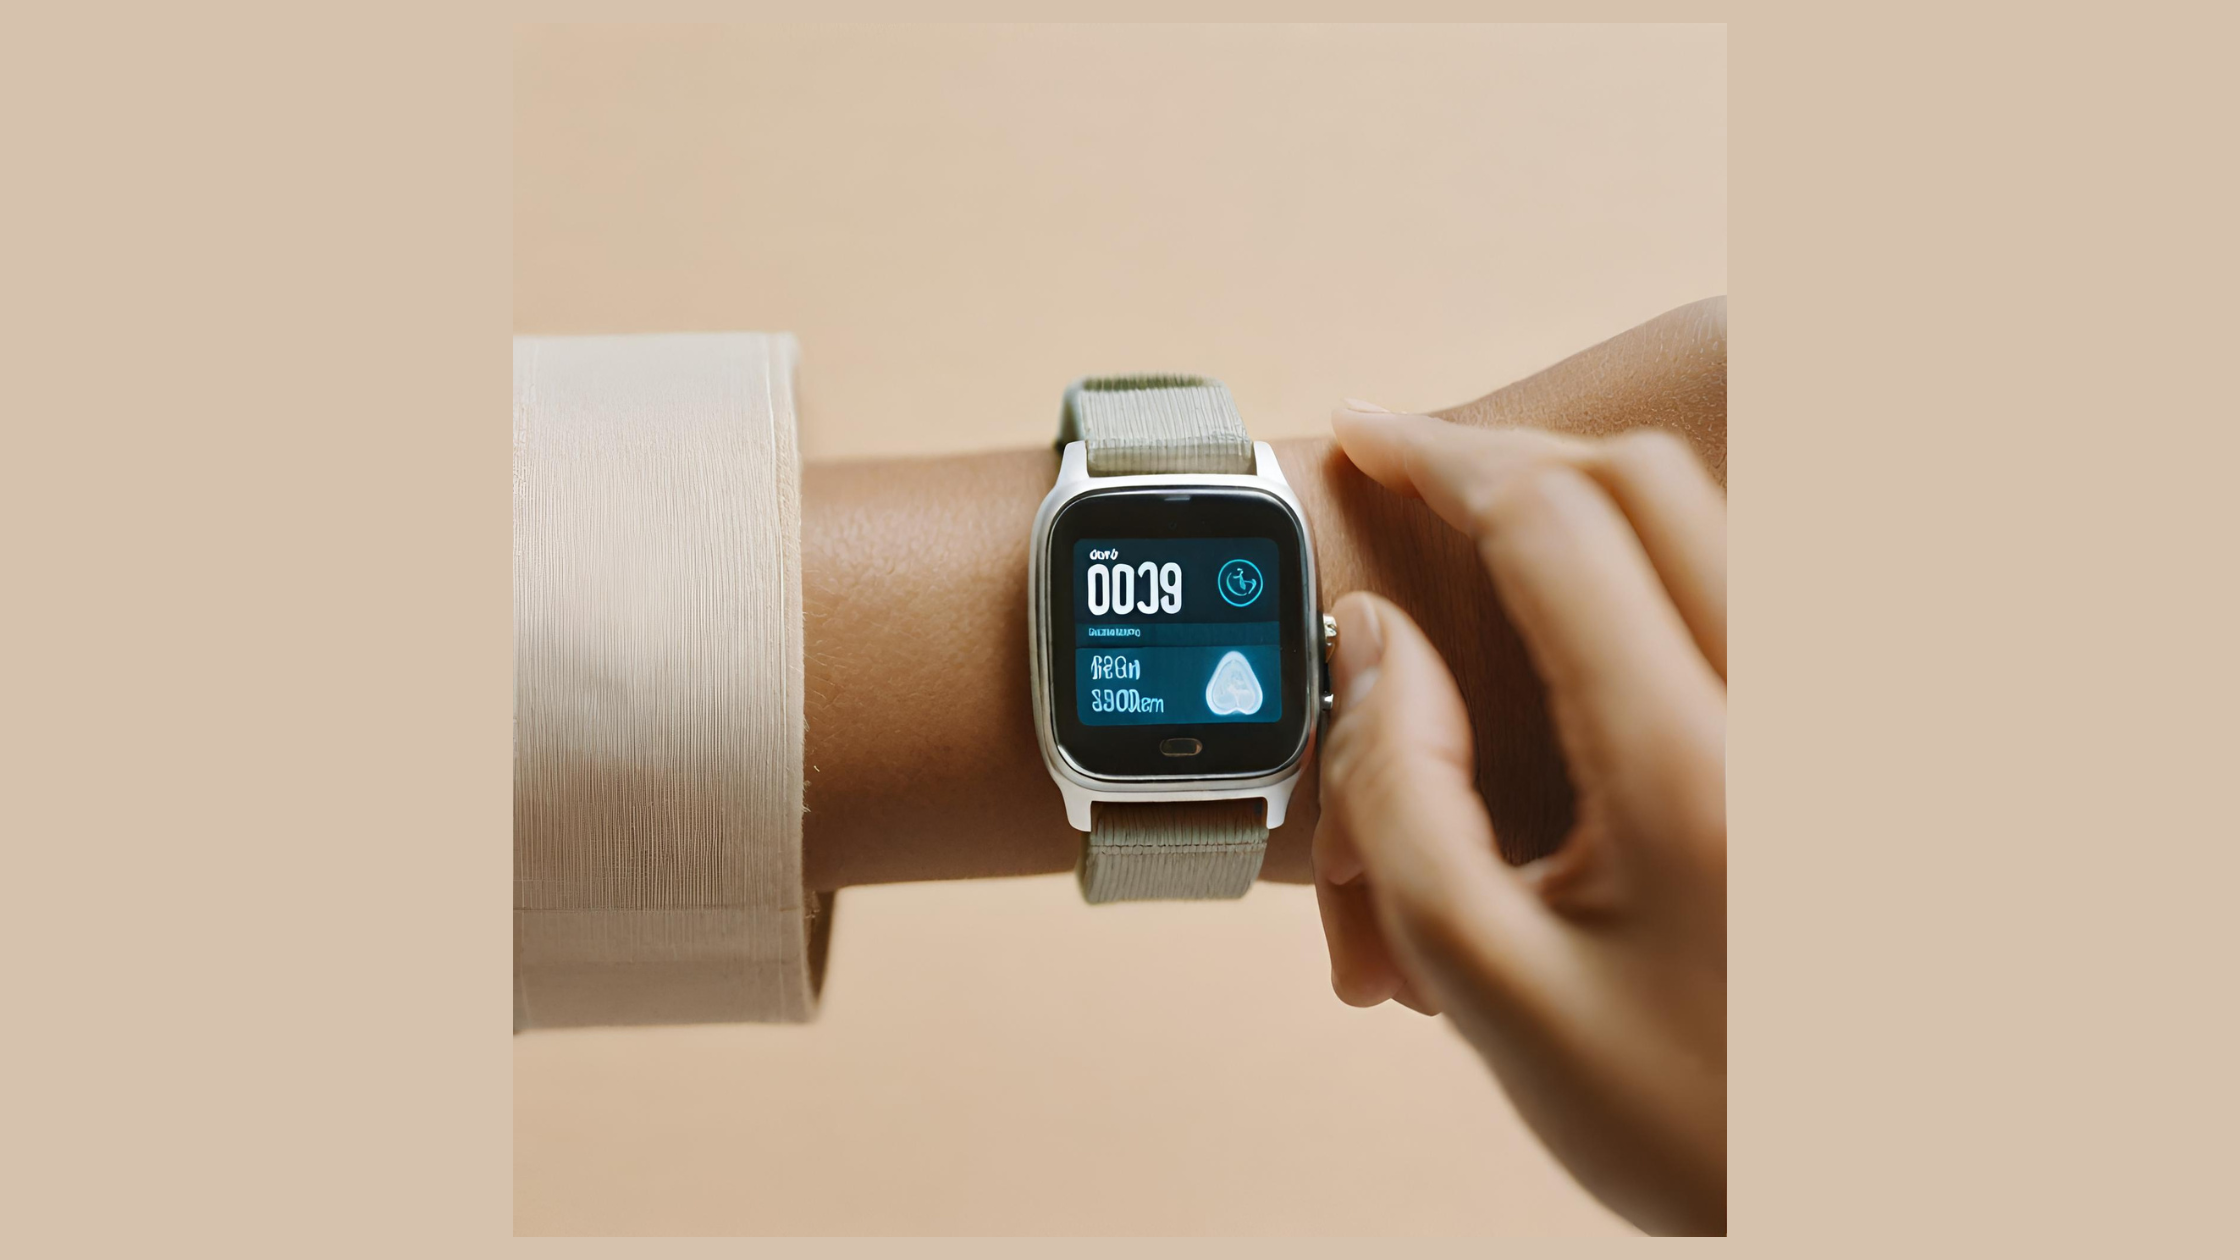 Fitness Enthusiasts Guide: Best Smart Watches To Track Your Workouts